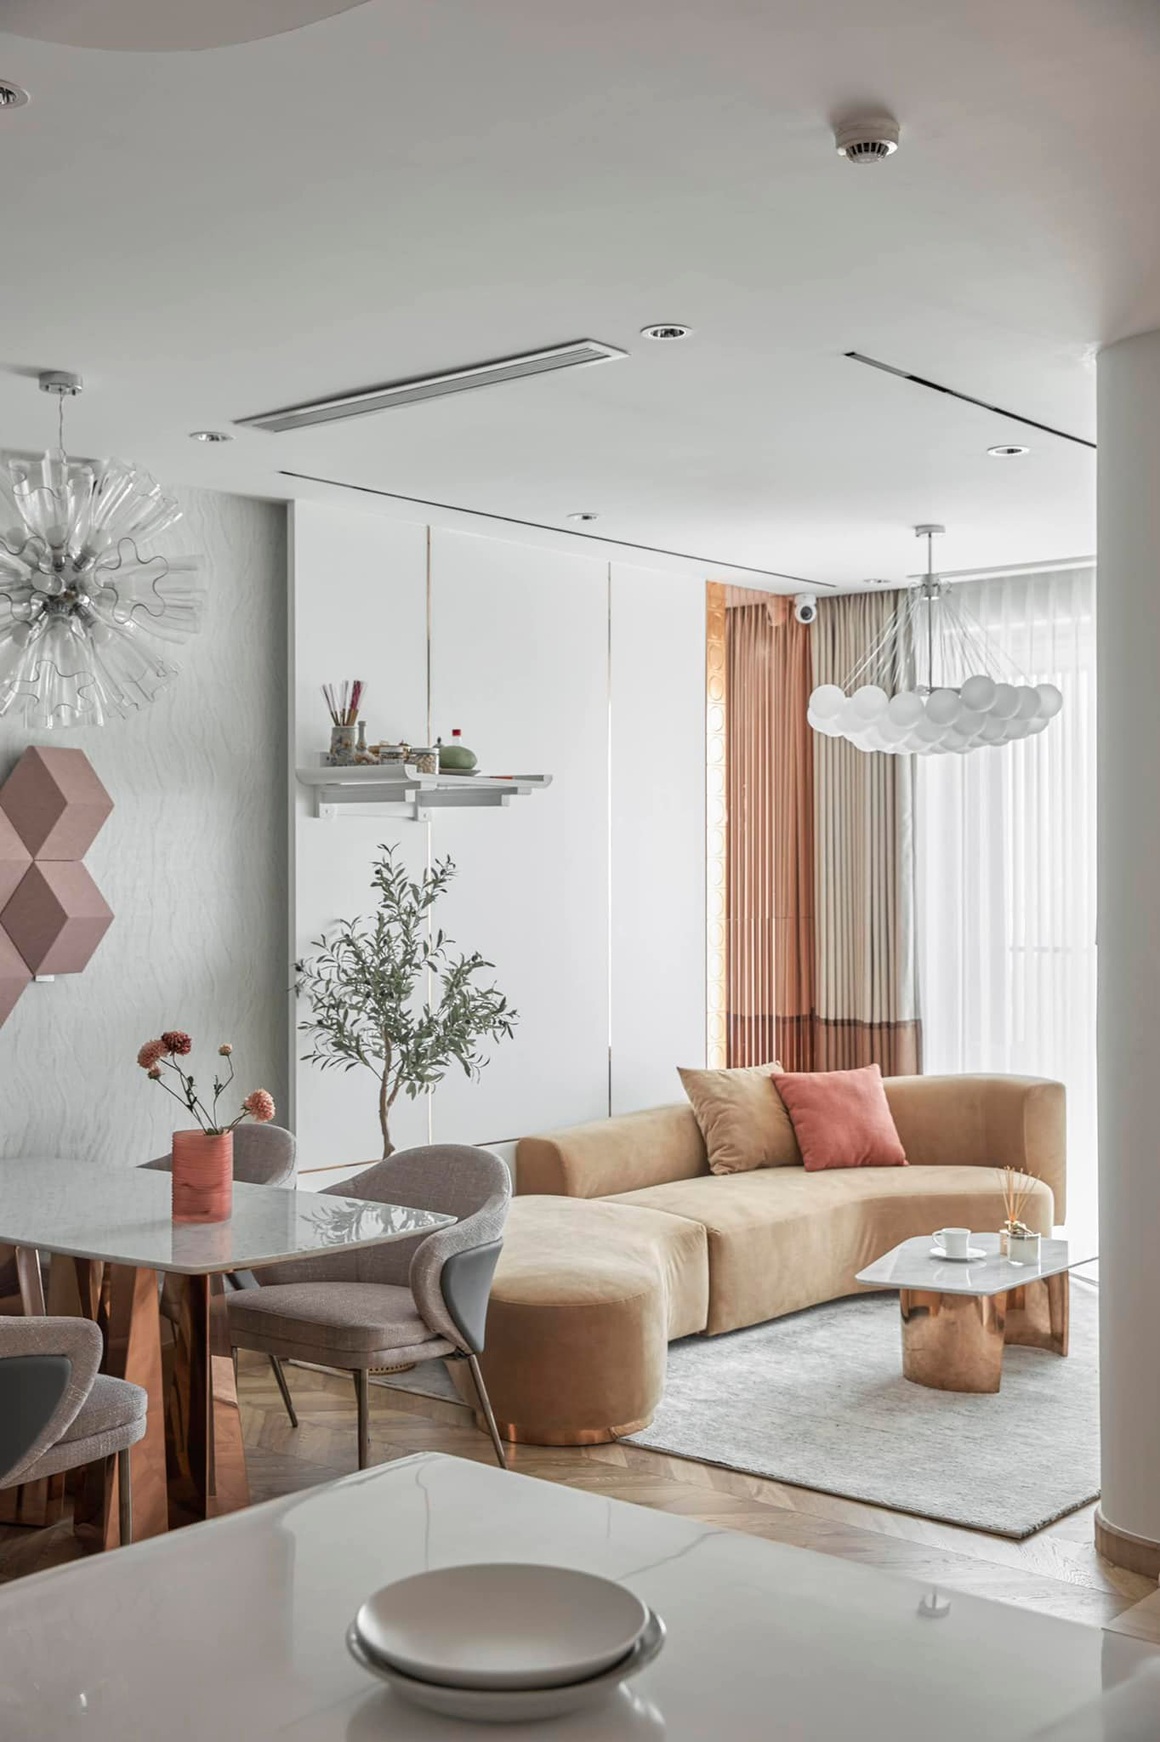 The metallic pink color is both beautiful and unusual, but if not used subtly, it can generate colorful, cheesy surroundings. This interior design is both luxurious and unfussy, giving the apartment a delightful and warm feeling when walking in.